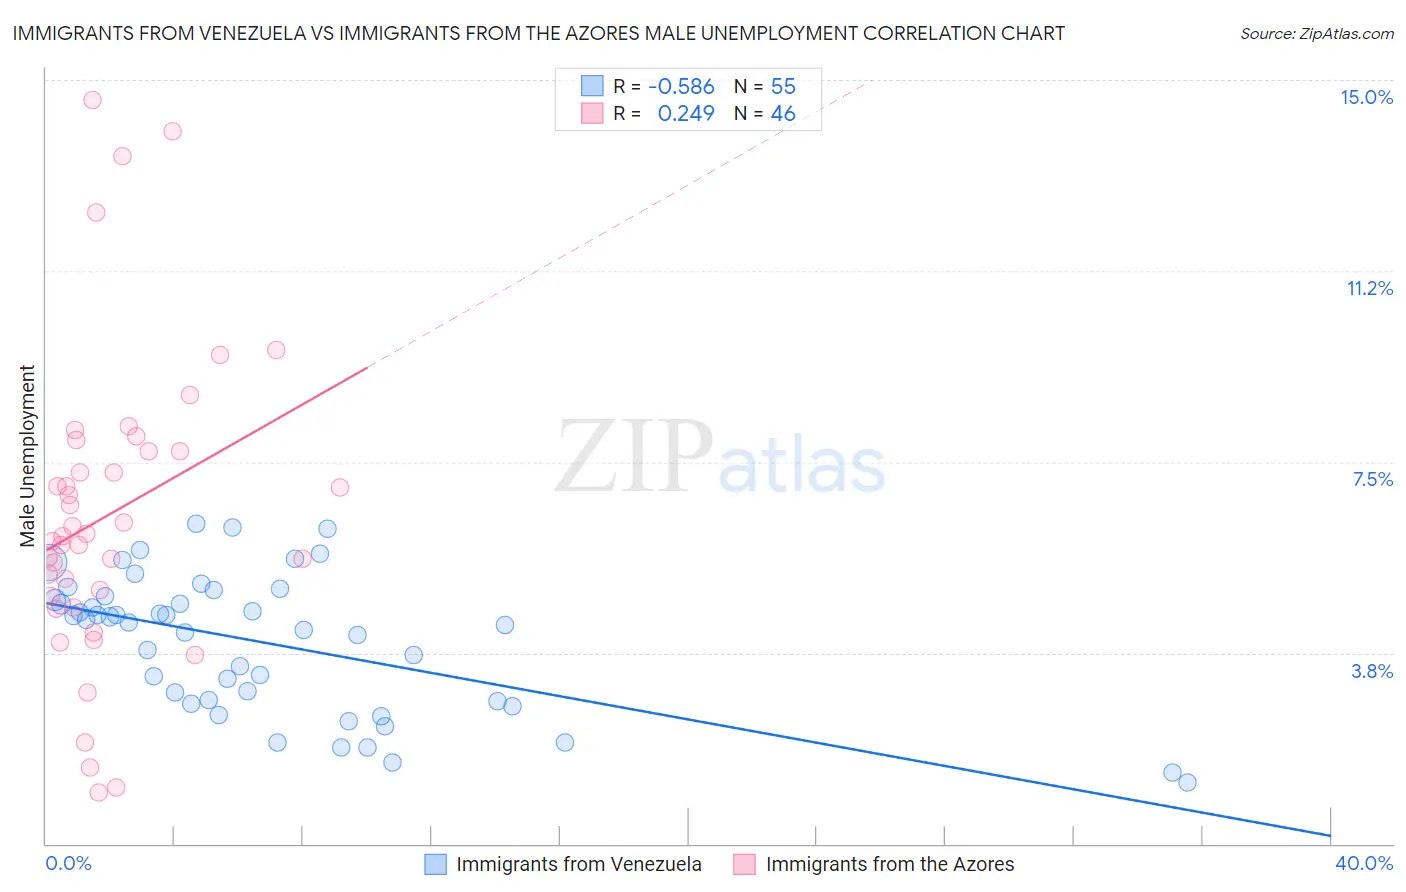 Immigrants from Venezuela vs Immigrants from the Azores Male Unemployment